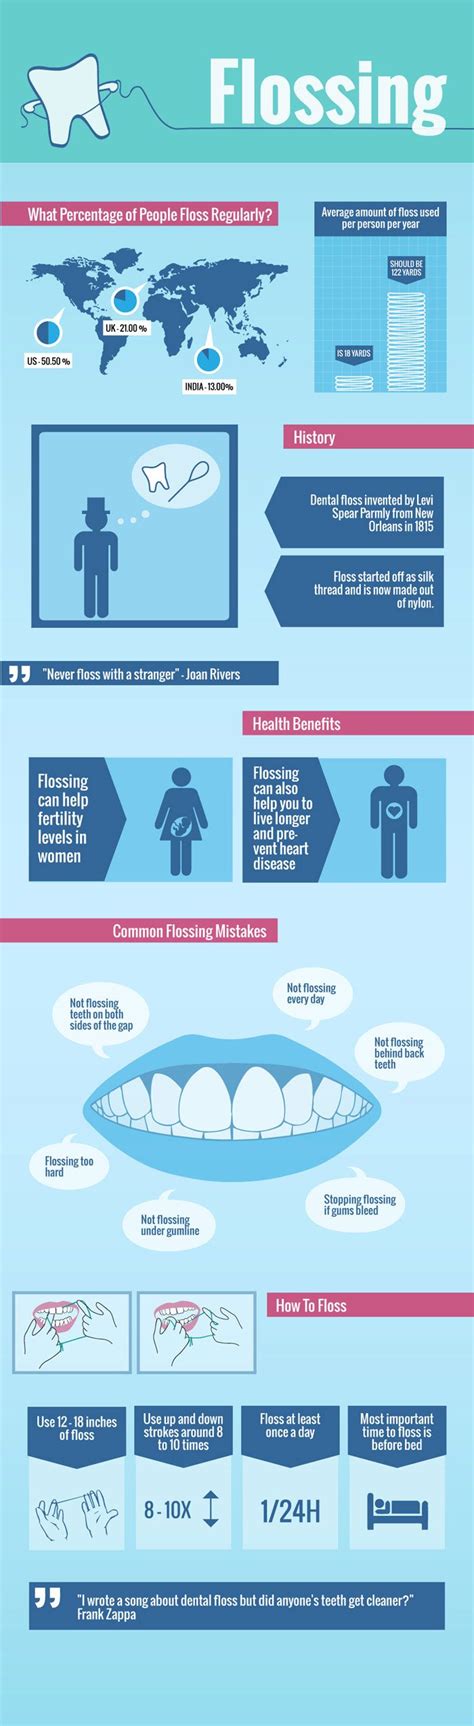 Fun Flossing Facts And Stats Infographic Flossing Facts Infographic